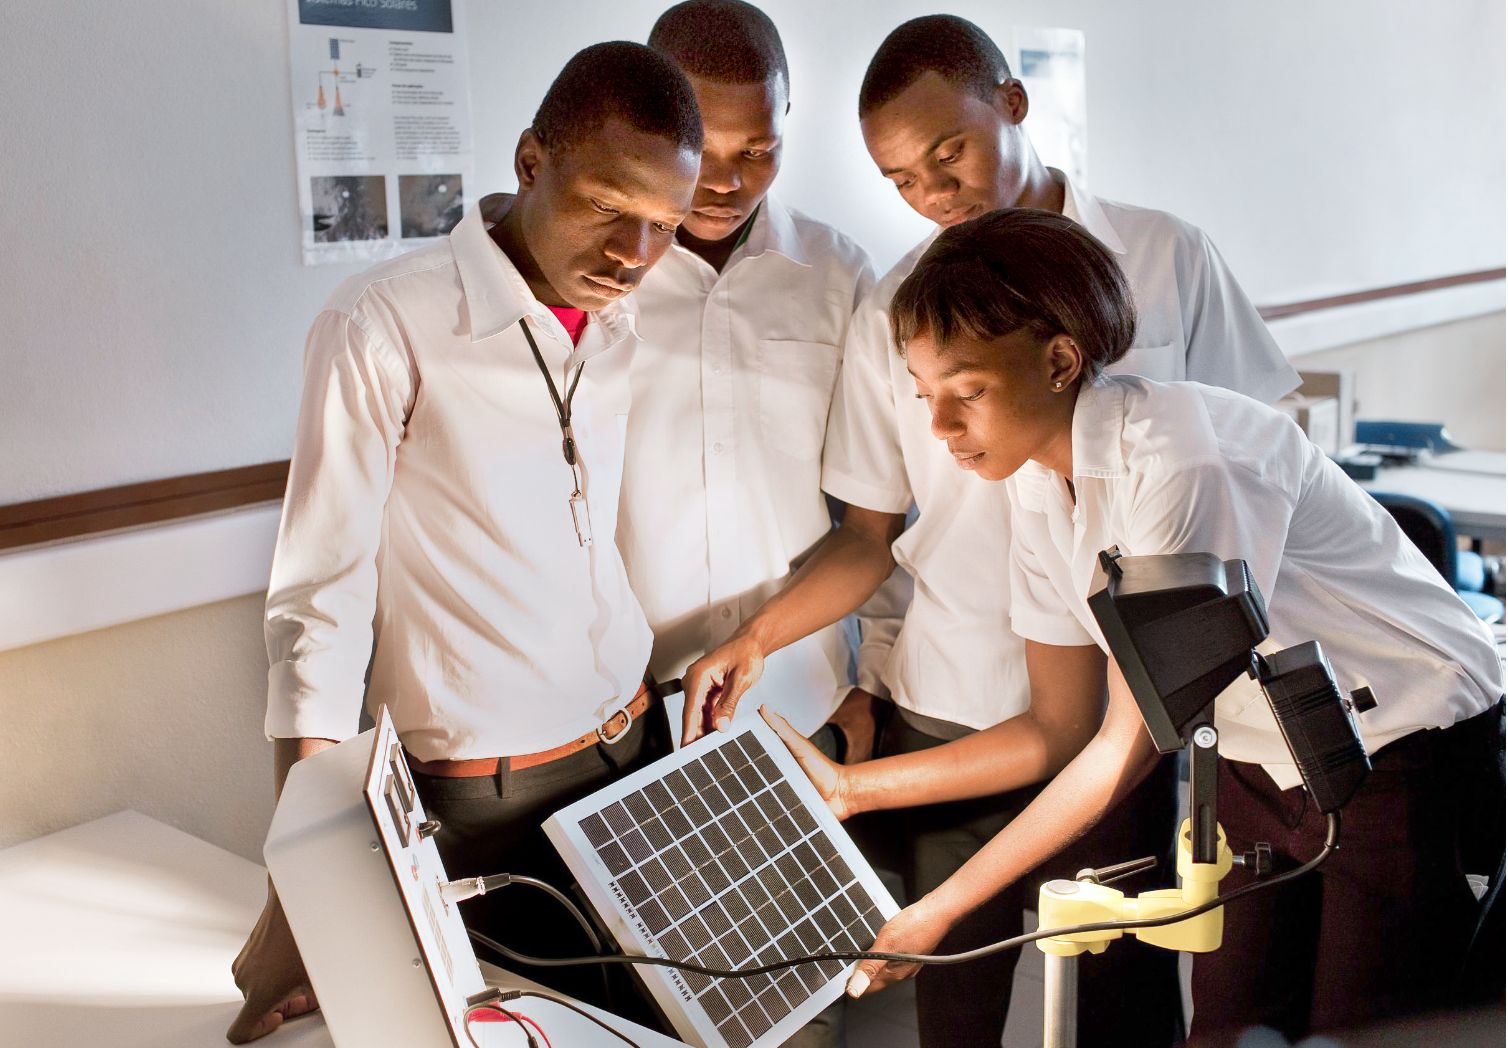 Photo: Four people standing around a solar panel illuminated by a lamp.